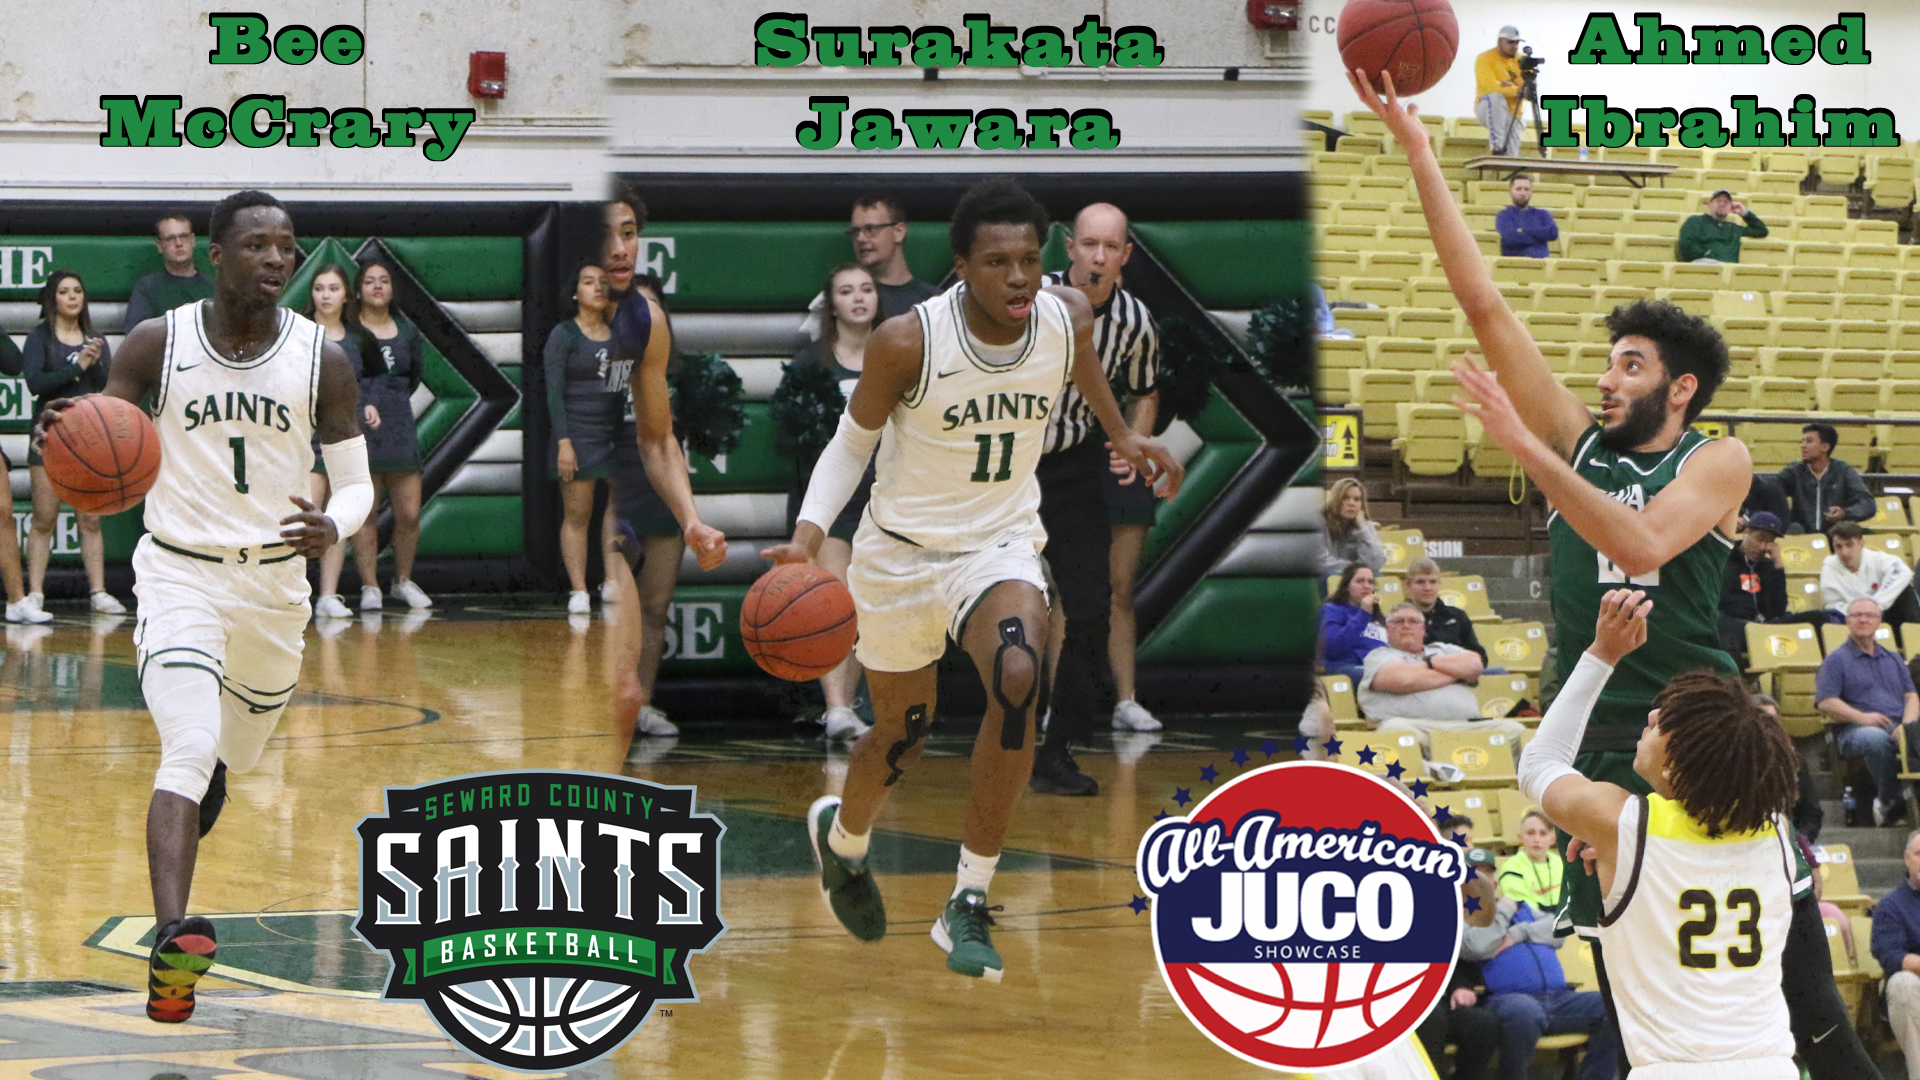 Three Saints invited to the 2020 All-American JUCO Showcase